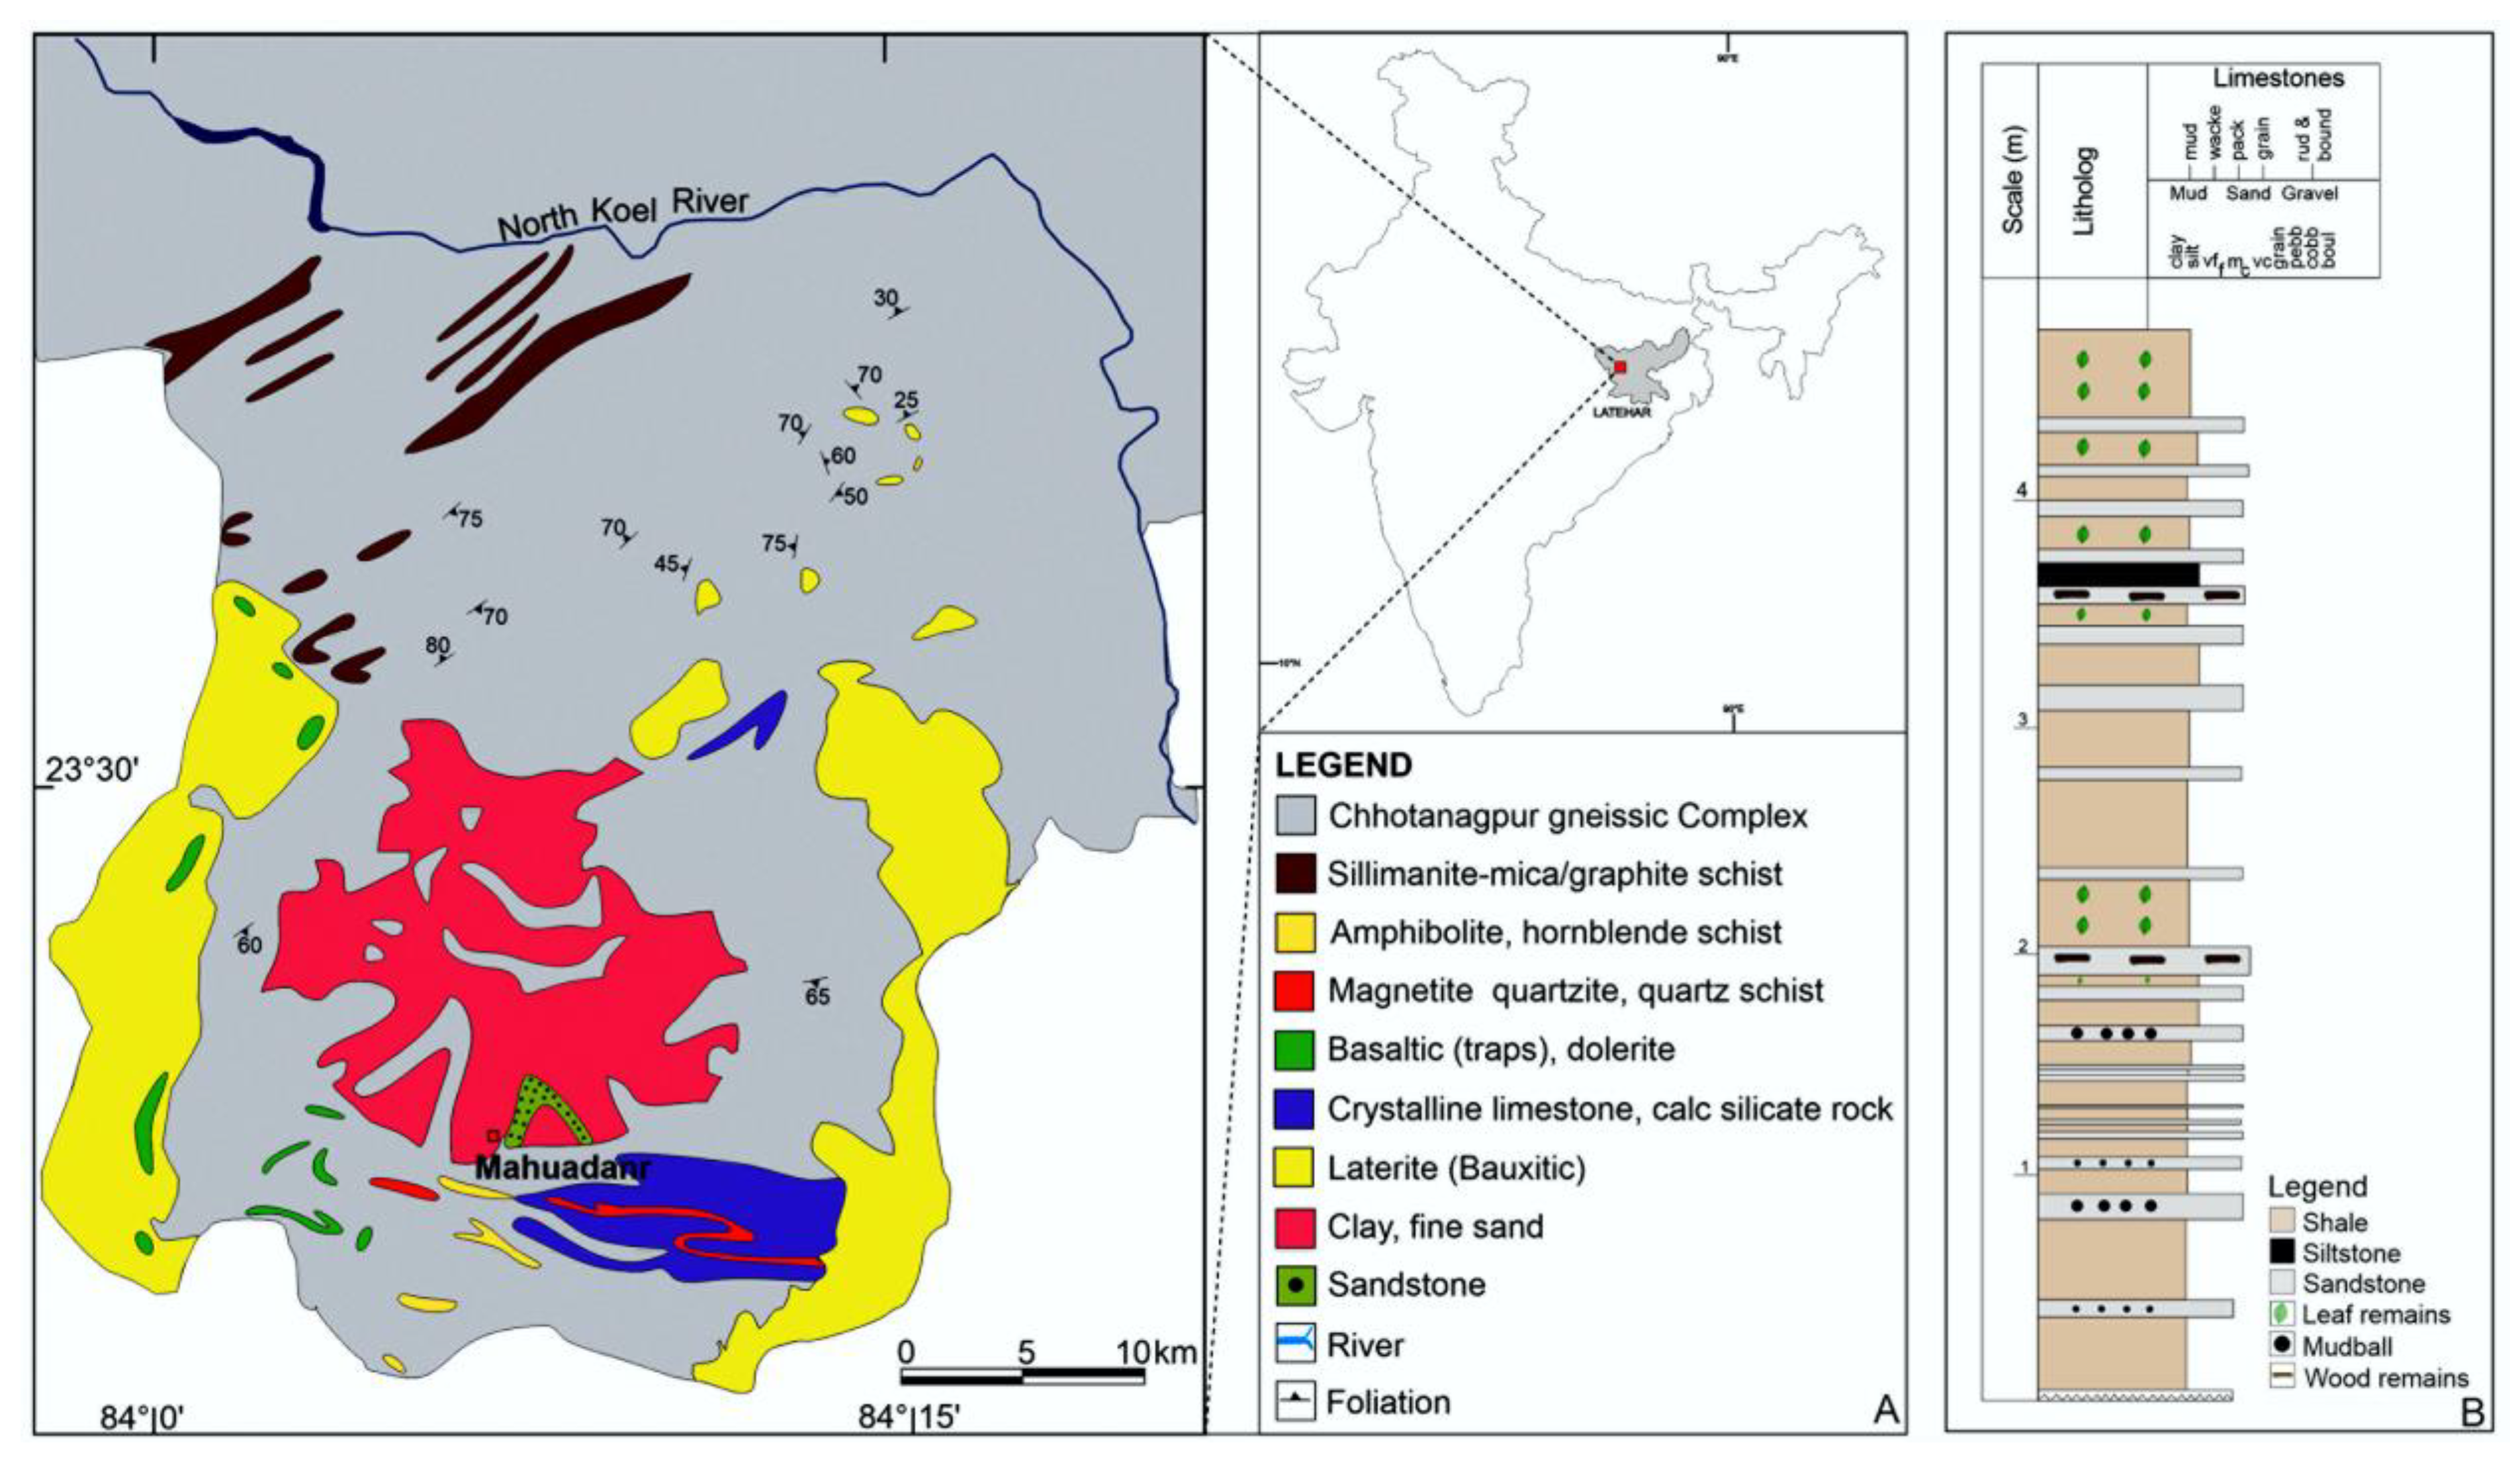 Diversity Free Full-Text Discovery of the Puparia of a Whitefly Species Found on Malvaceae in the Pliocene Rajdanda Formation, Jharkhand, Eastern India